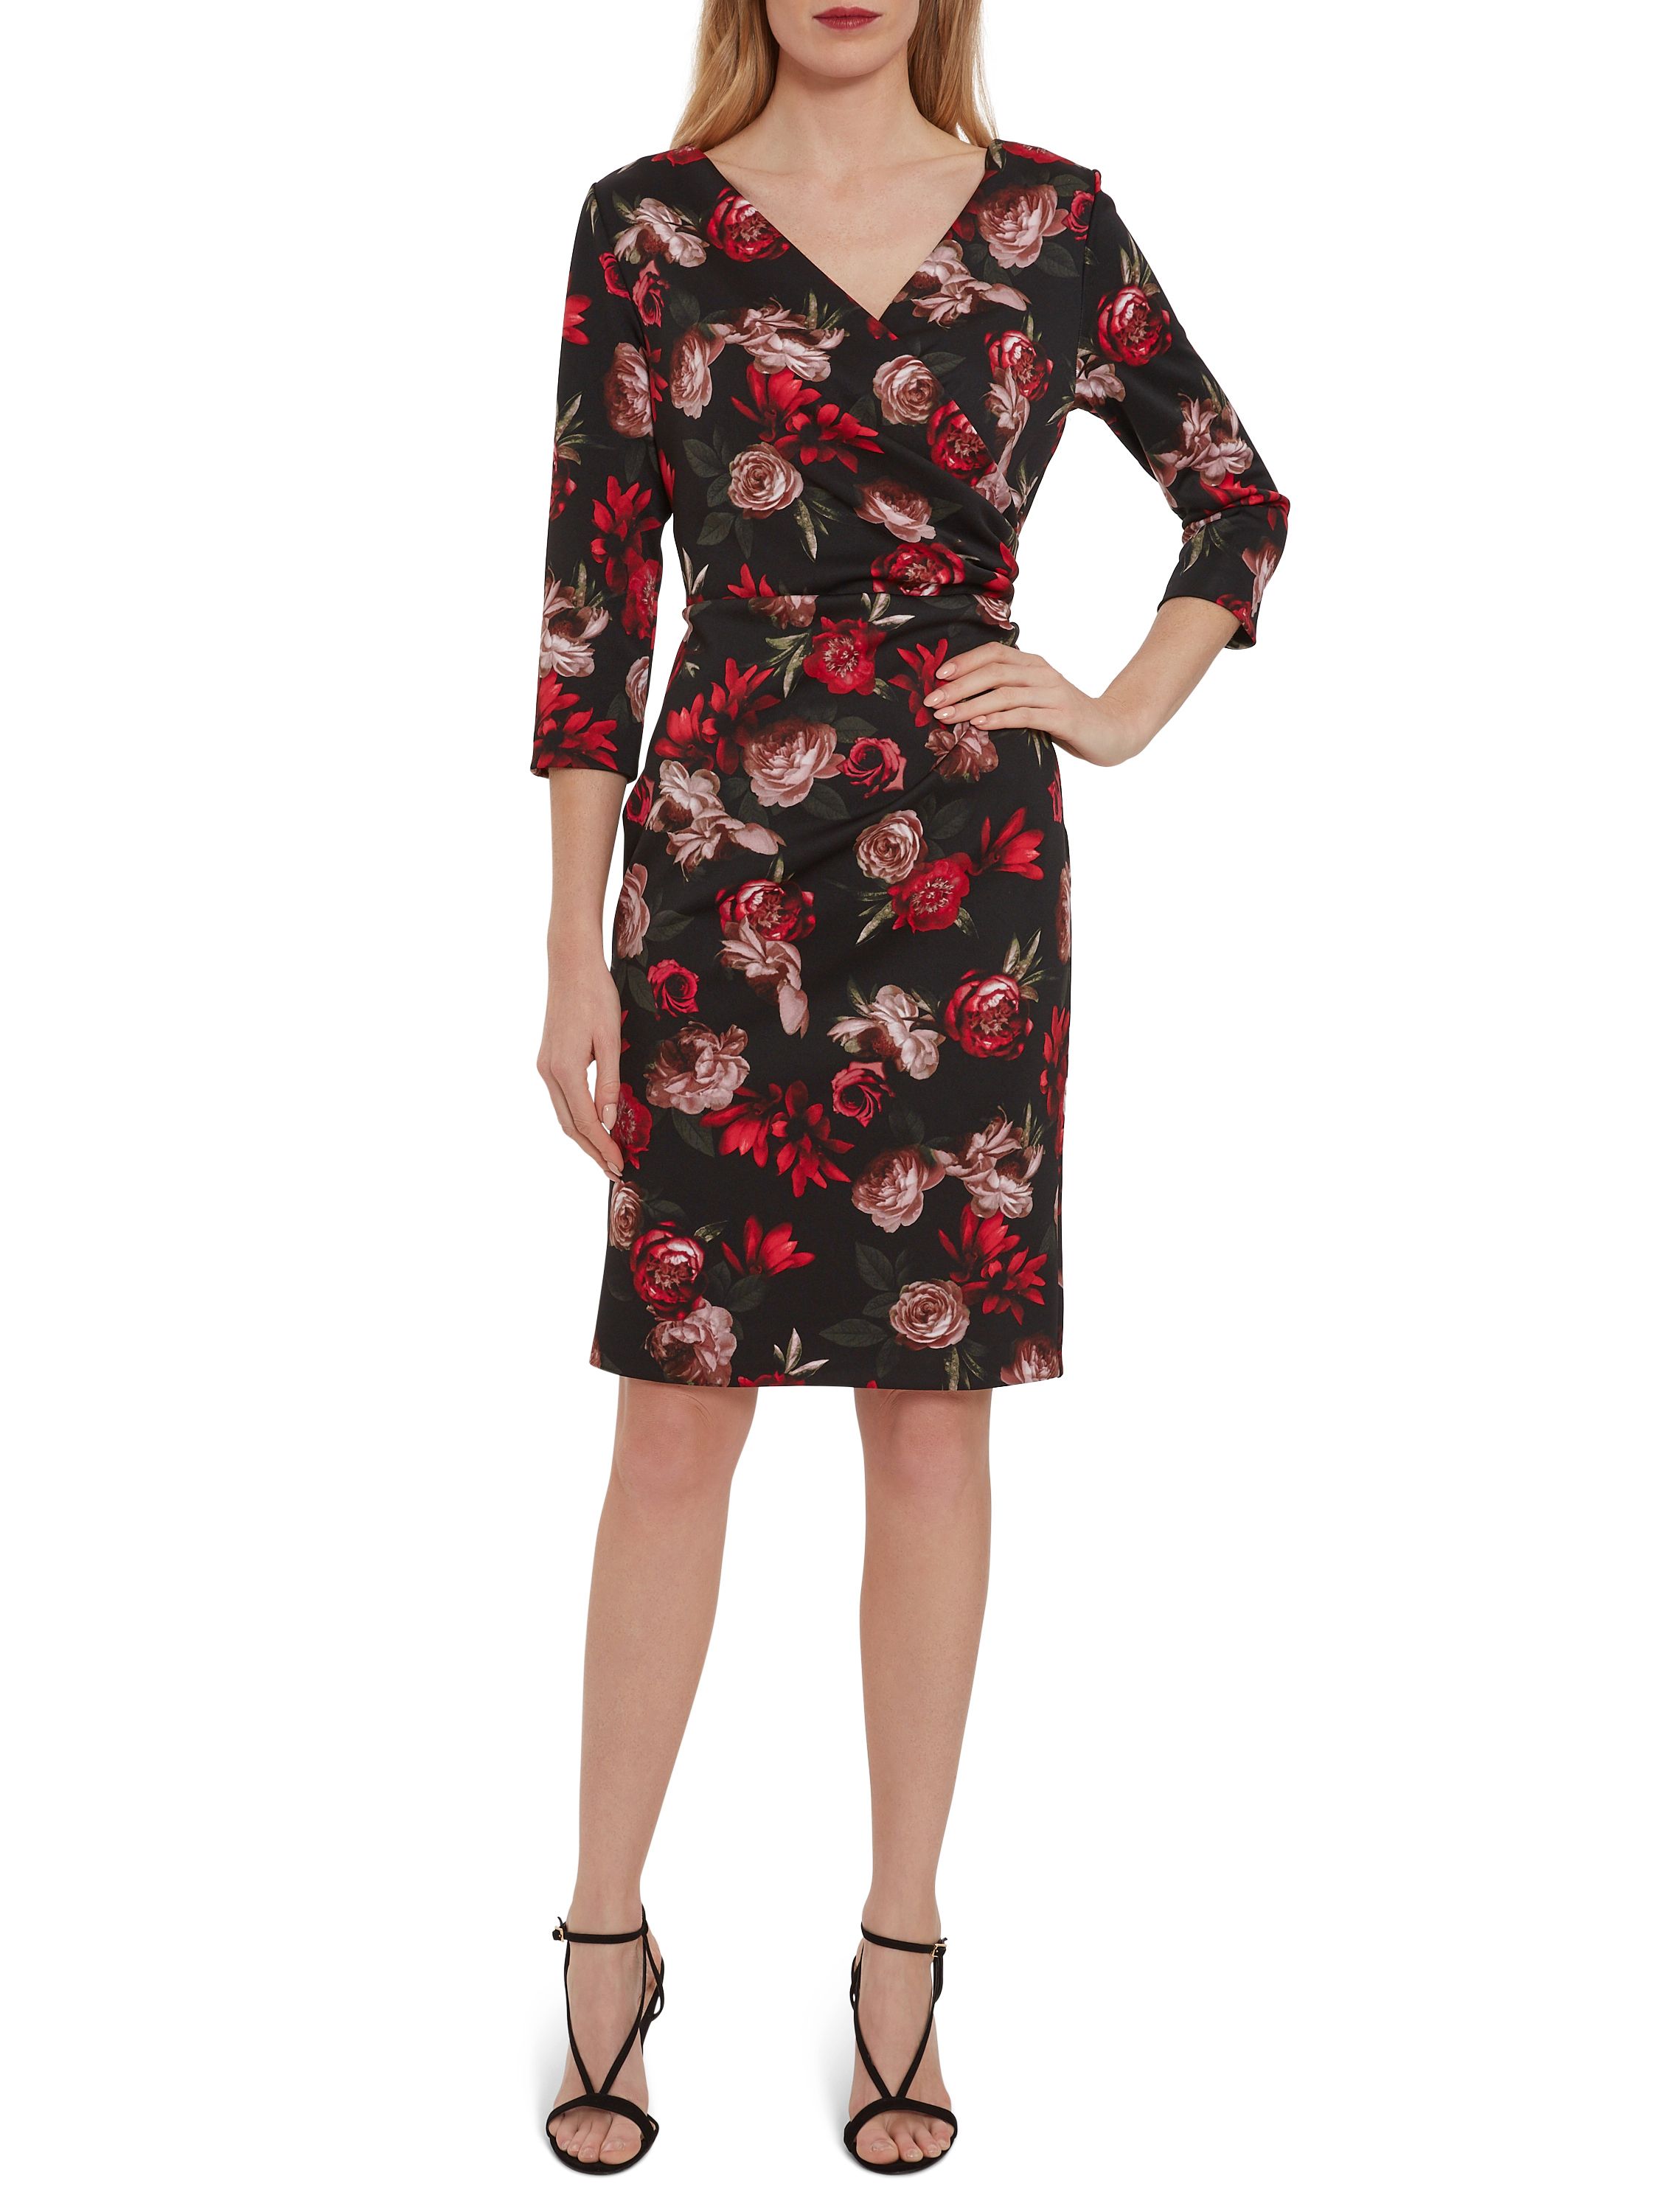 This Gina Bacconi dress will make a fabulous addition to your wardrobe. Perfect as a daywear option, the dress is fashioned from a lovely floral print scuba making it effortless to wear. The dress features a wrap style bodice for added class with elegant draping to side giving you perfect silhouette. Fully lined for comfort.